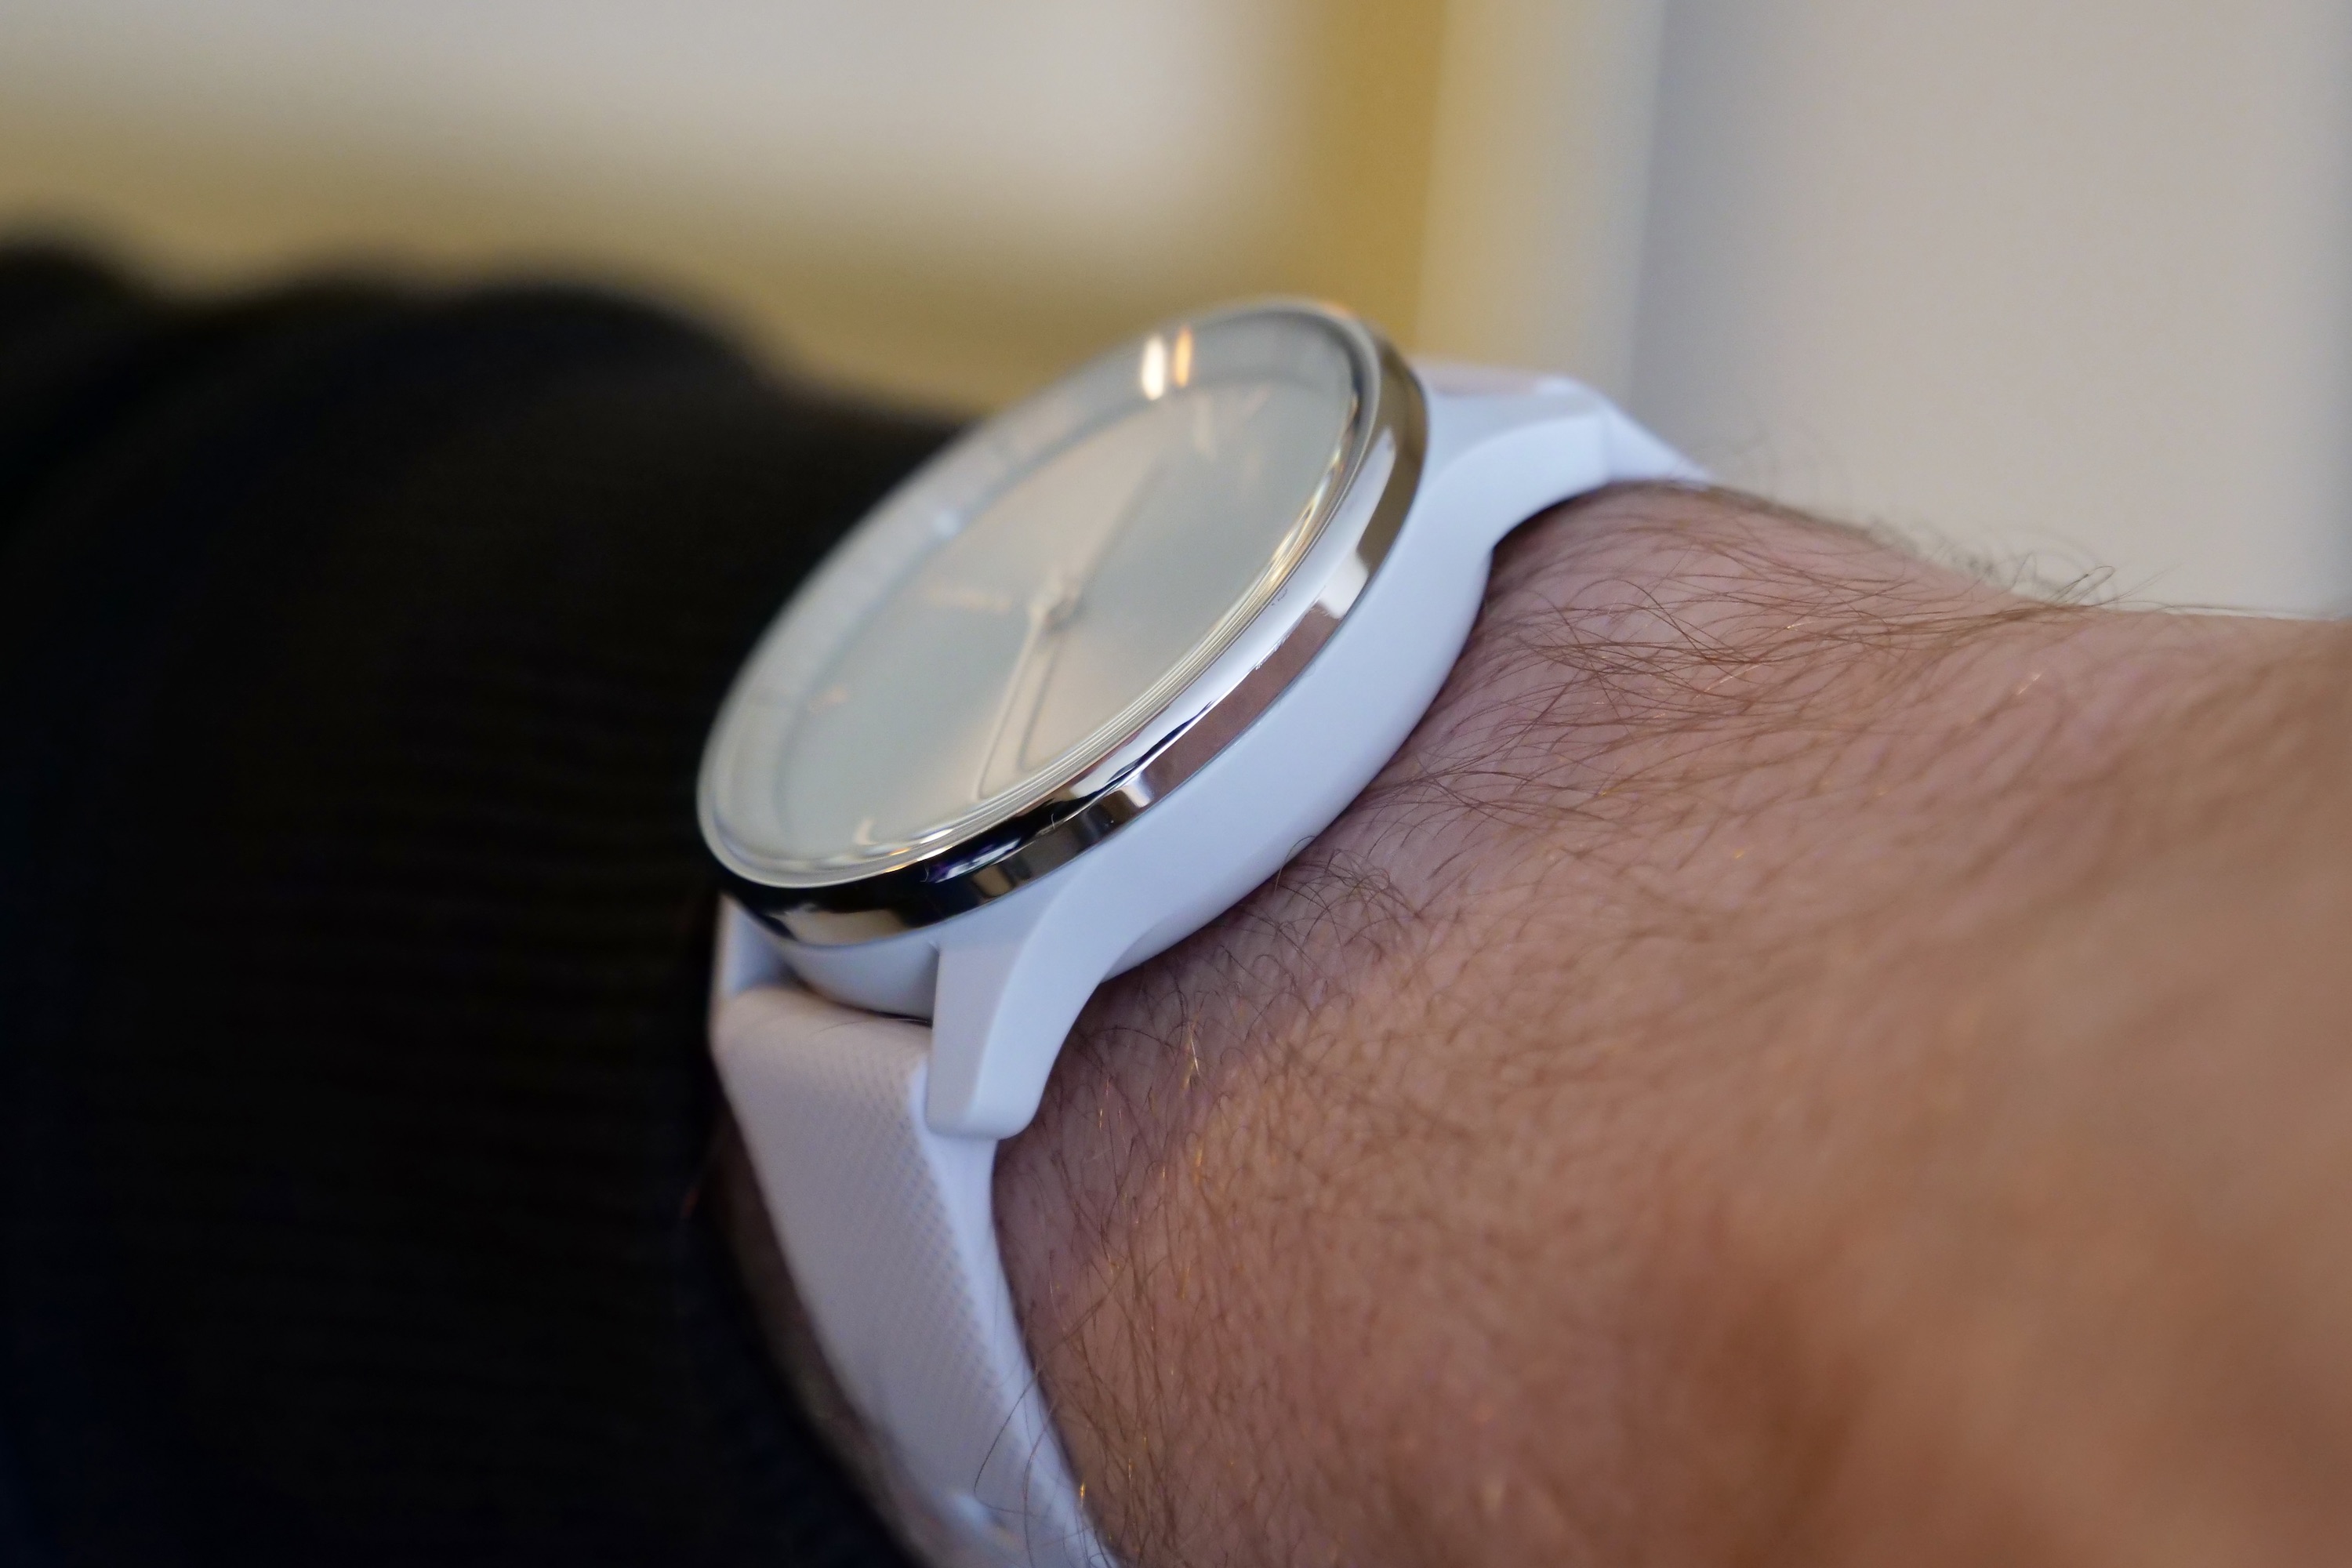 Garmin's new Vívomove Trend fixes my biggest issue with its smartwatches